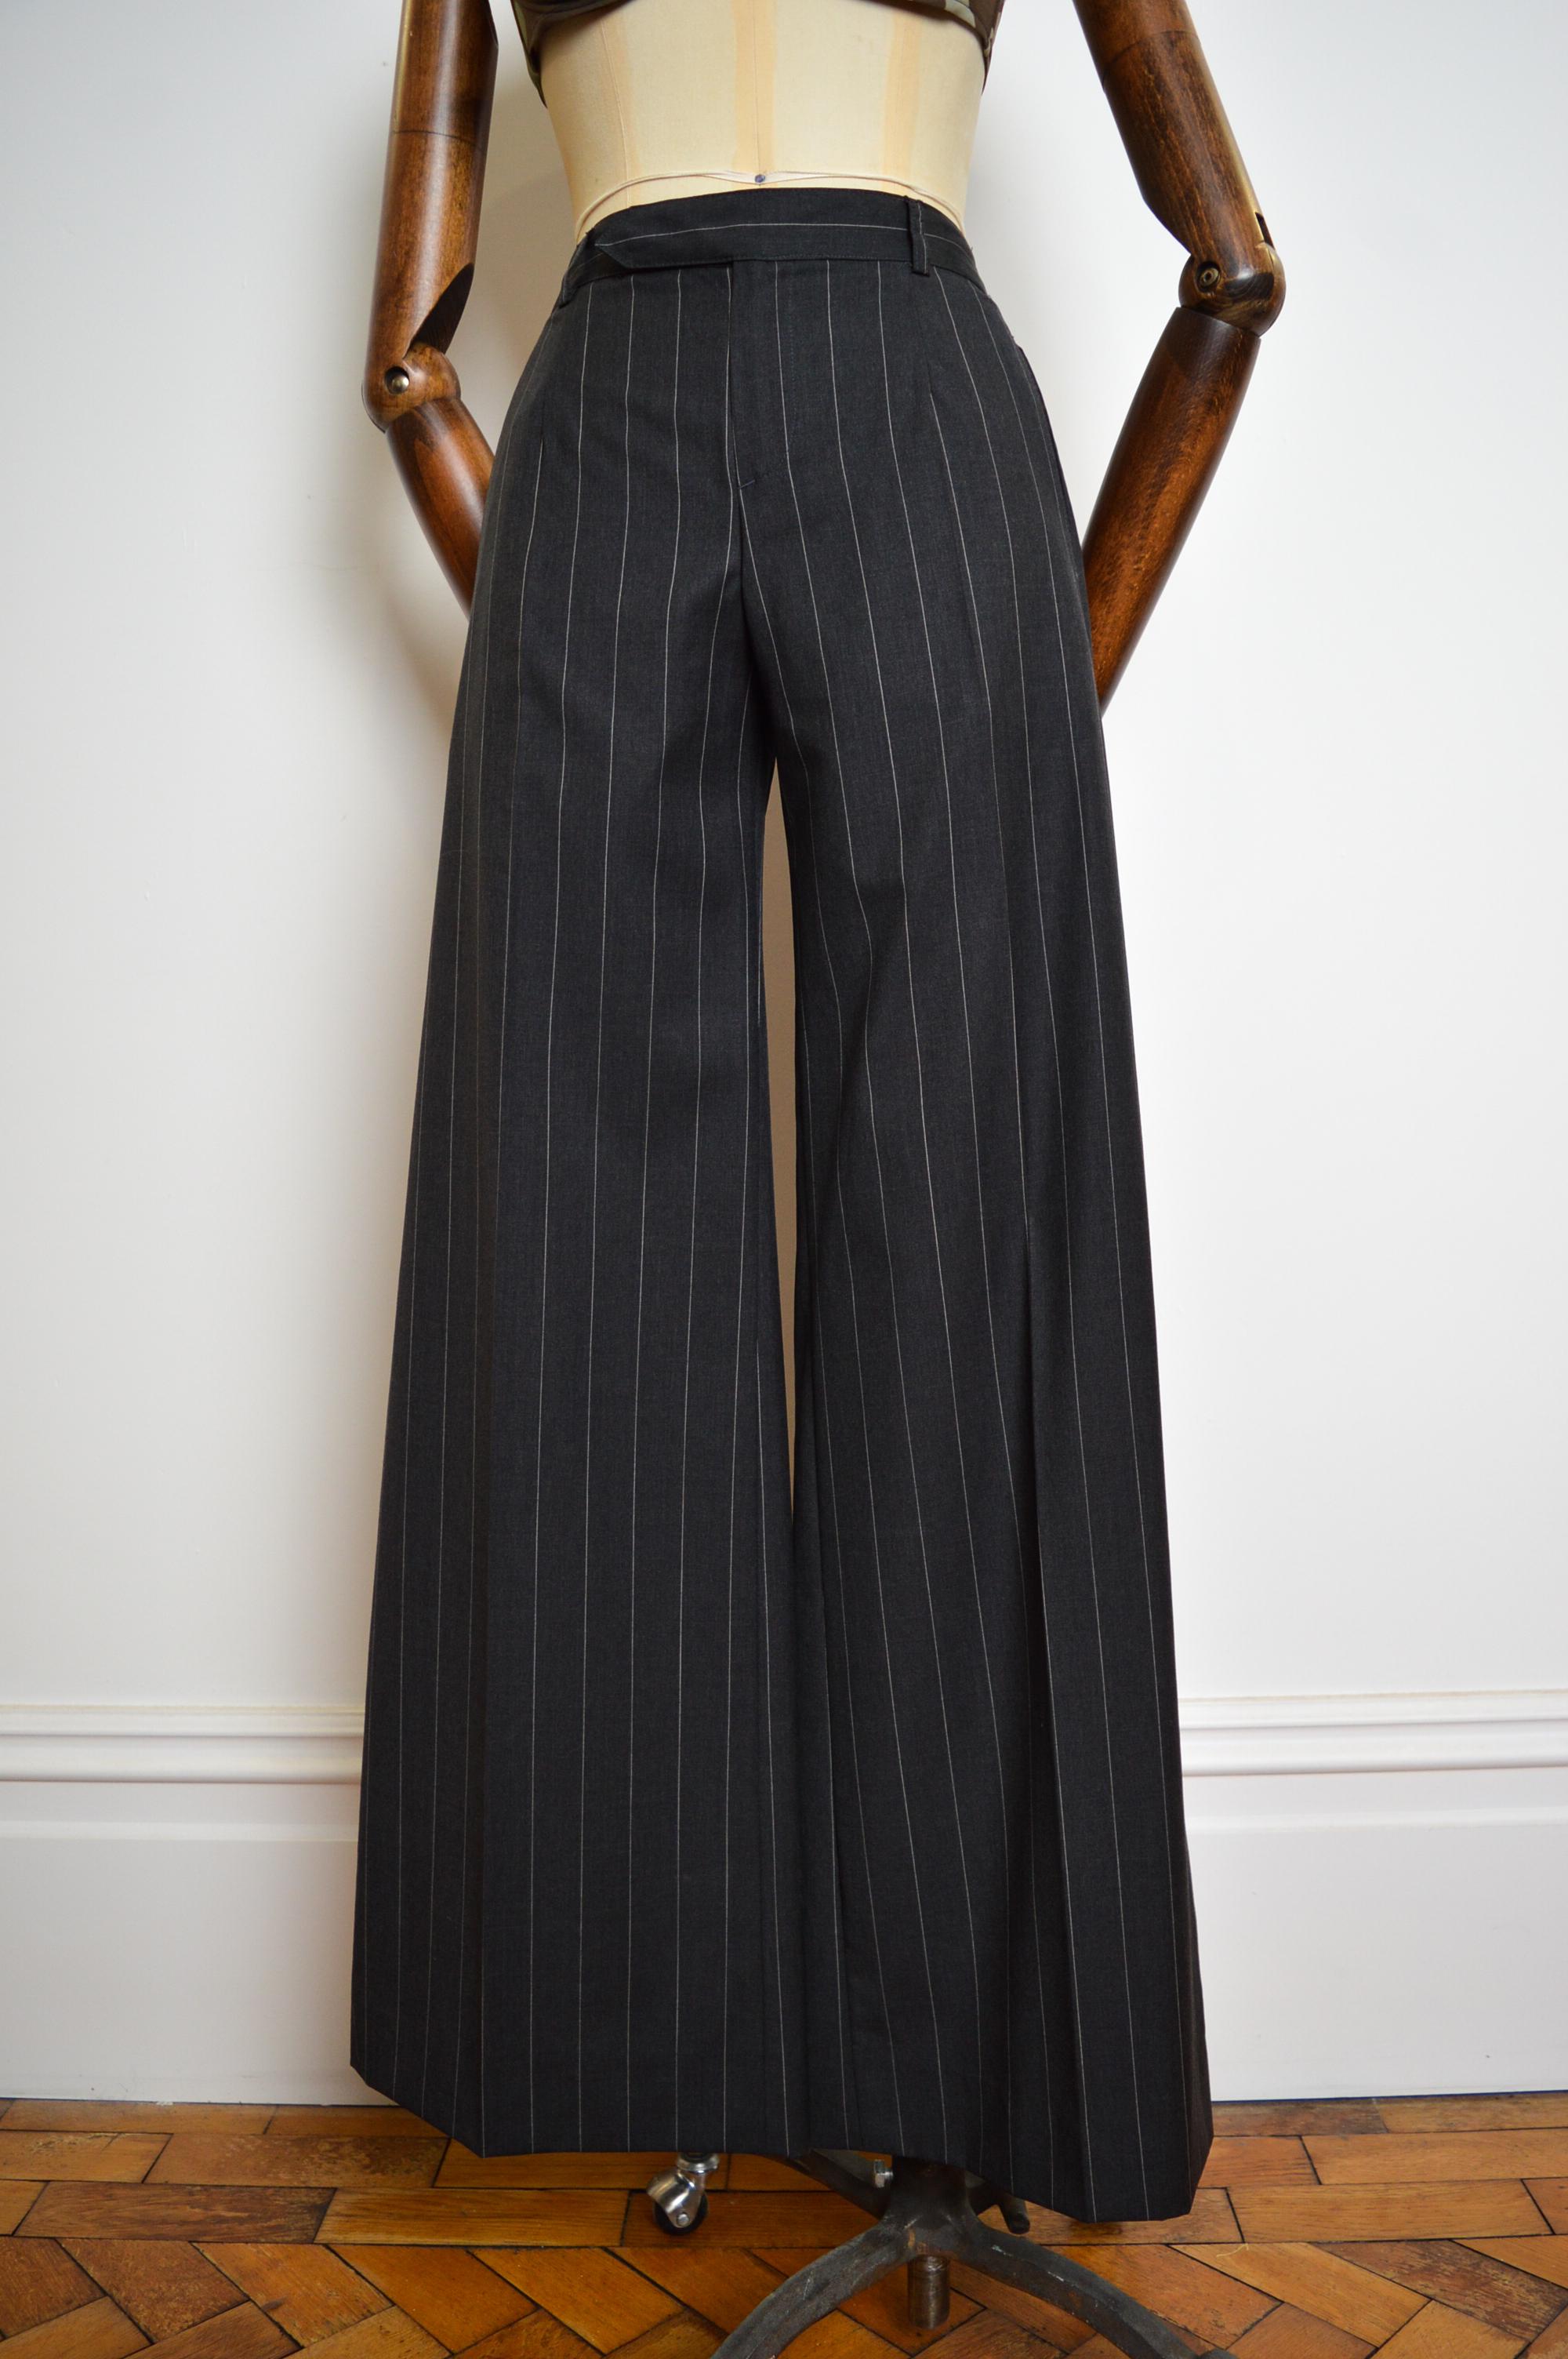 Sublime Vintage 1990's 'Jean Paul Gaultier' wide legged Tailored pin-striped pants in Charcoal grey. Timeless !

MADE IN ITALY !

100% Virgin Wool.

Features : High waisted, Zip hook closure, signature Gaultier loop detail at the back, Belt loops, 4